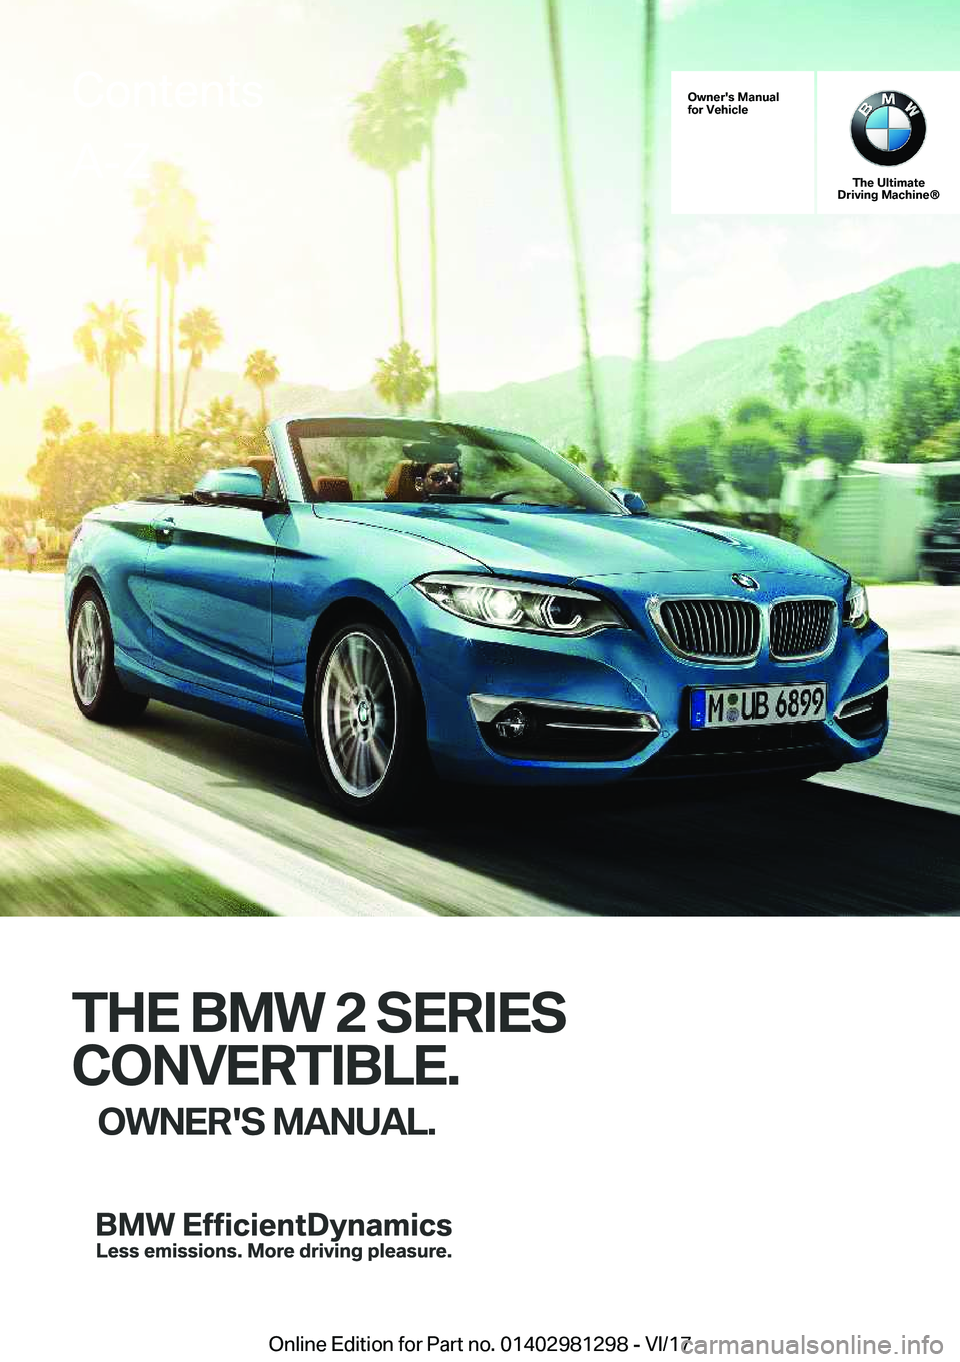 BMW 2 SERIES CONVERTIBLE 2018  Owners Manual �O�w�n�e�r�'�s��M�a�n�u�a�l
�f�o�r��V�e�h�i�c�l�e
�T�h�e��U�l�t�i�m�a�t�e
�D�r�i�v�i�n�g��M�a�c�h�i�n�e�n
�T�H�E��B�M�W��2��S�E�R�I�E�S
�C�O�N�V�E�R�T�I�B�L�E�. �O�W�N�E�R�'�S��M�A�N�U